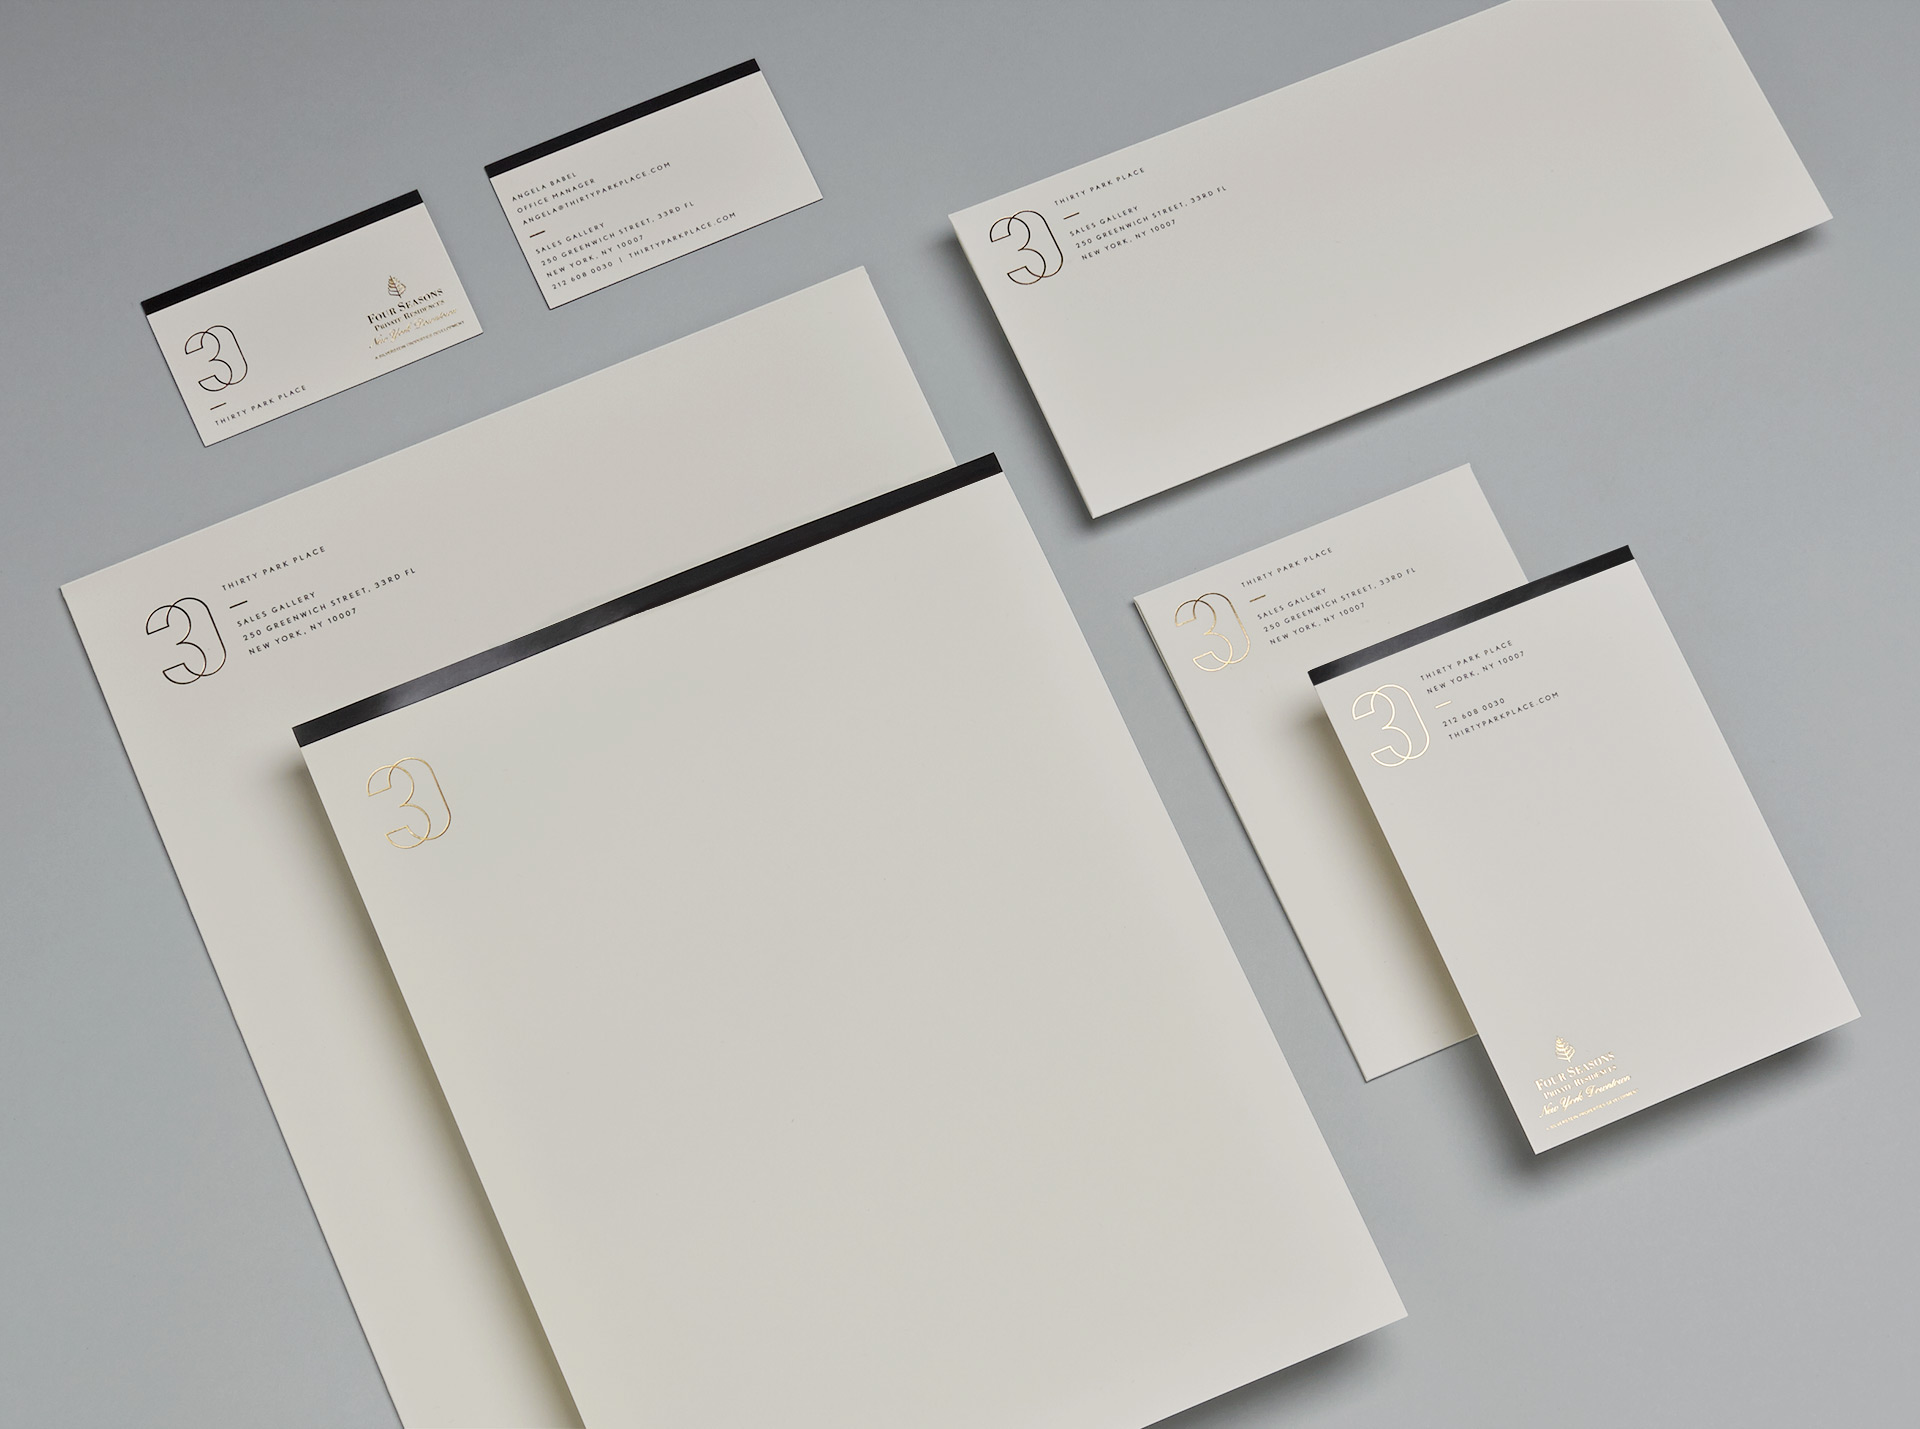 Gold foiled stationery for Four Seasons private residence 30 Park Place by Mother